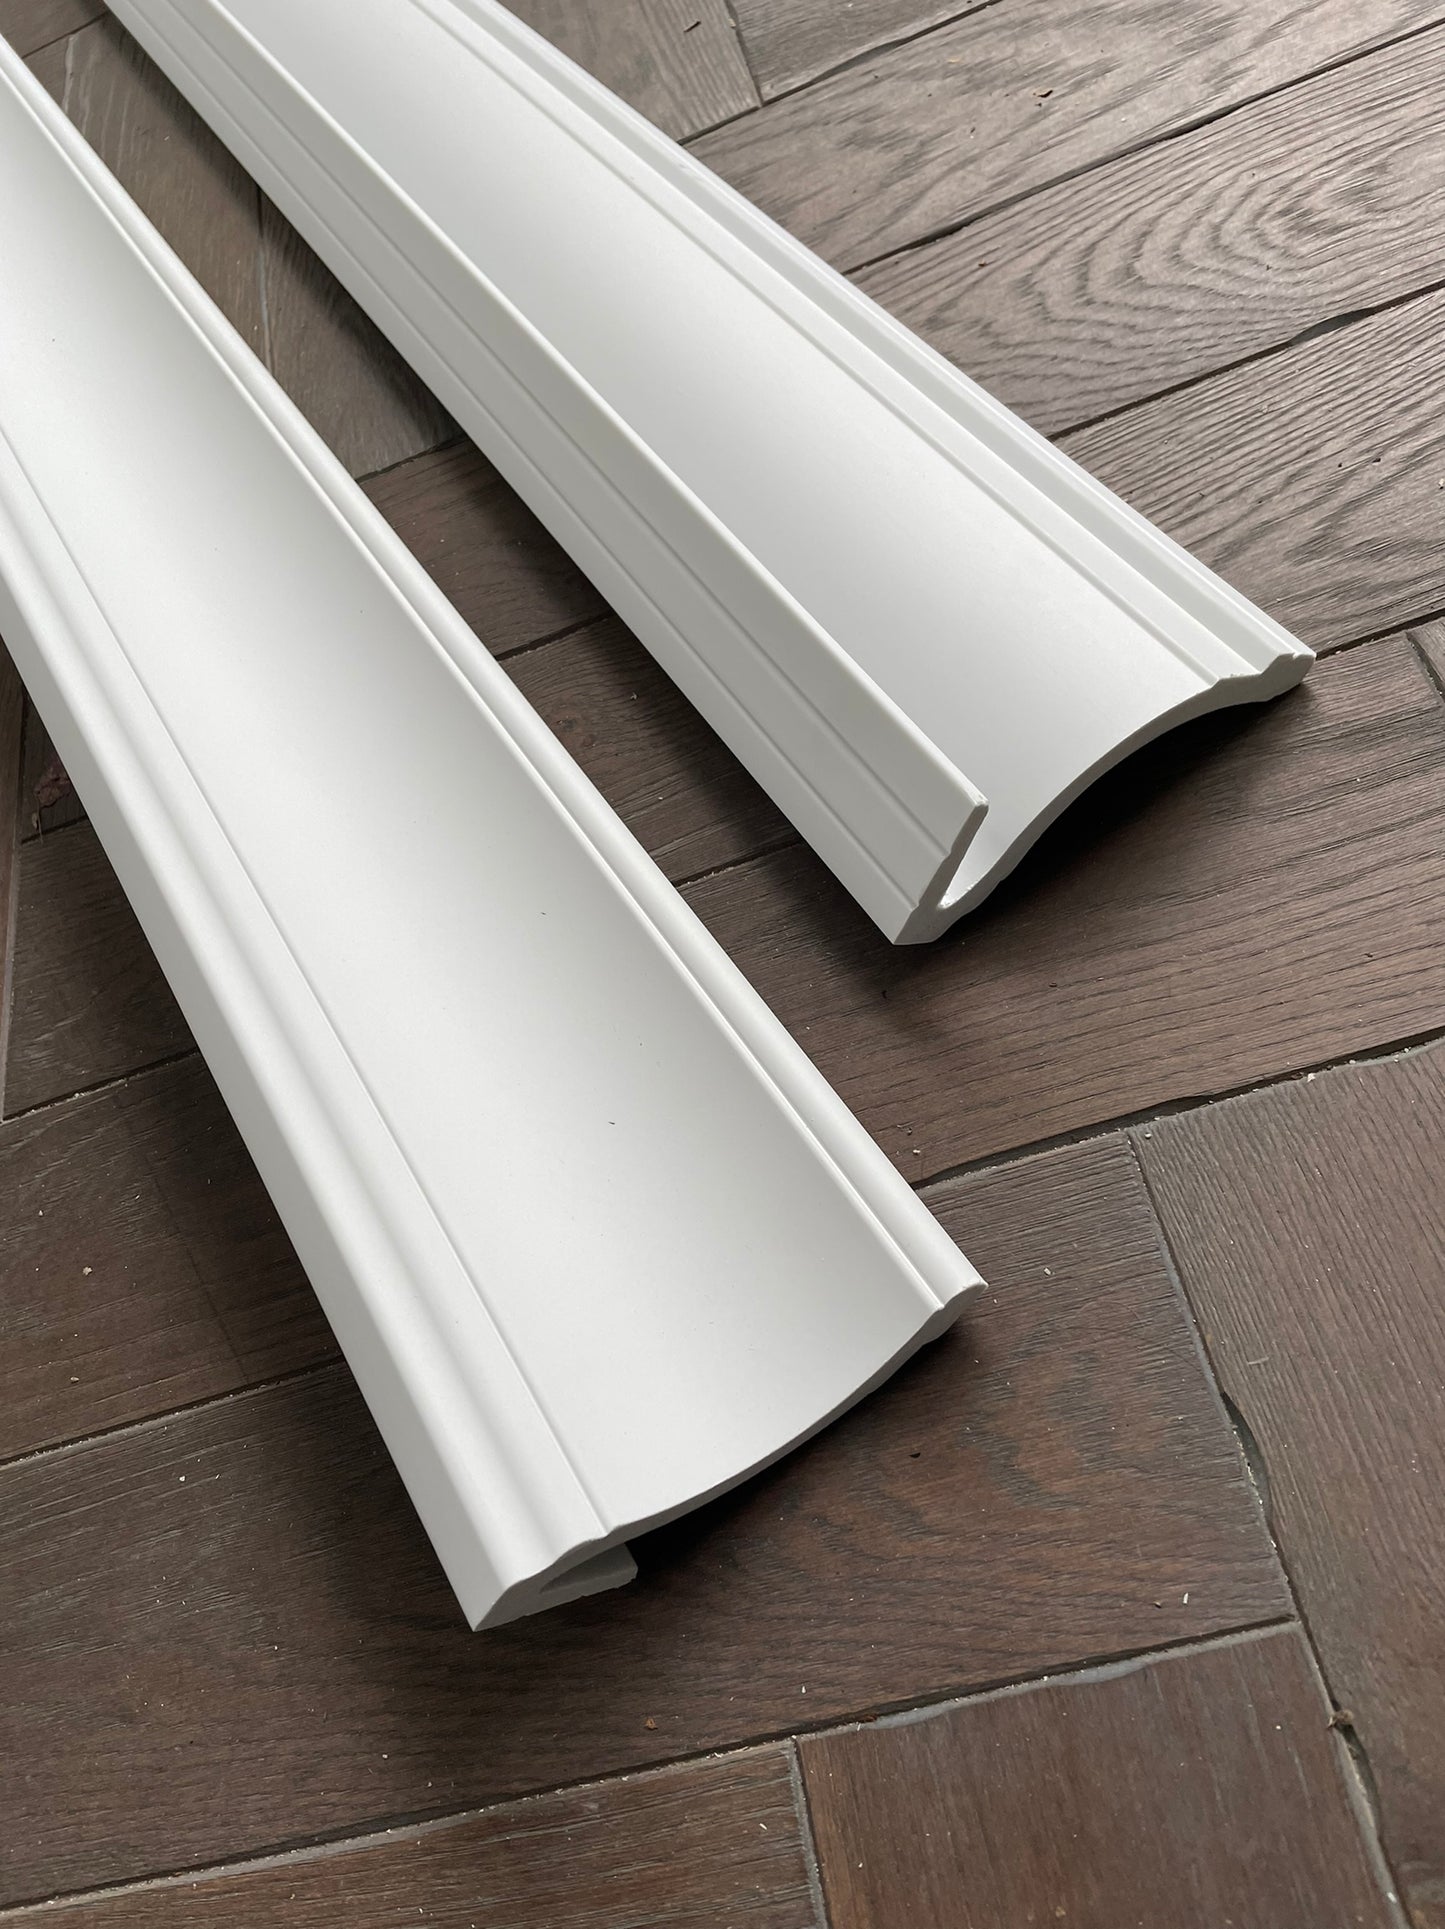 MD161 Coving - Lightweight Coving laying on a wooden floor